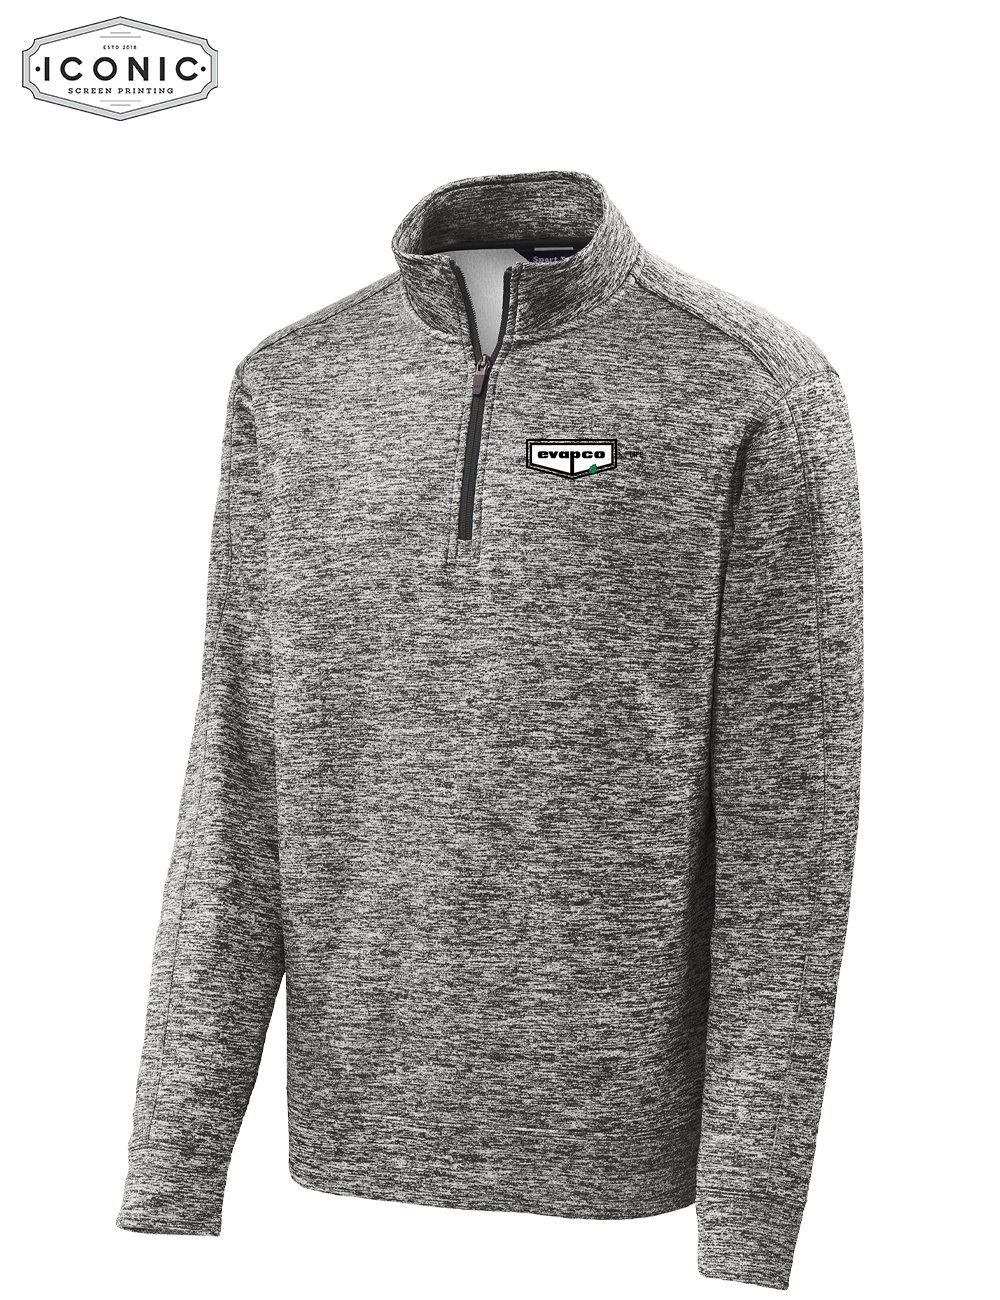 Evapco for Life - PosiCharge Electric Heather Fleece 1/4-Zip Pullover - Embroidery